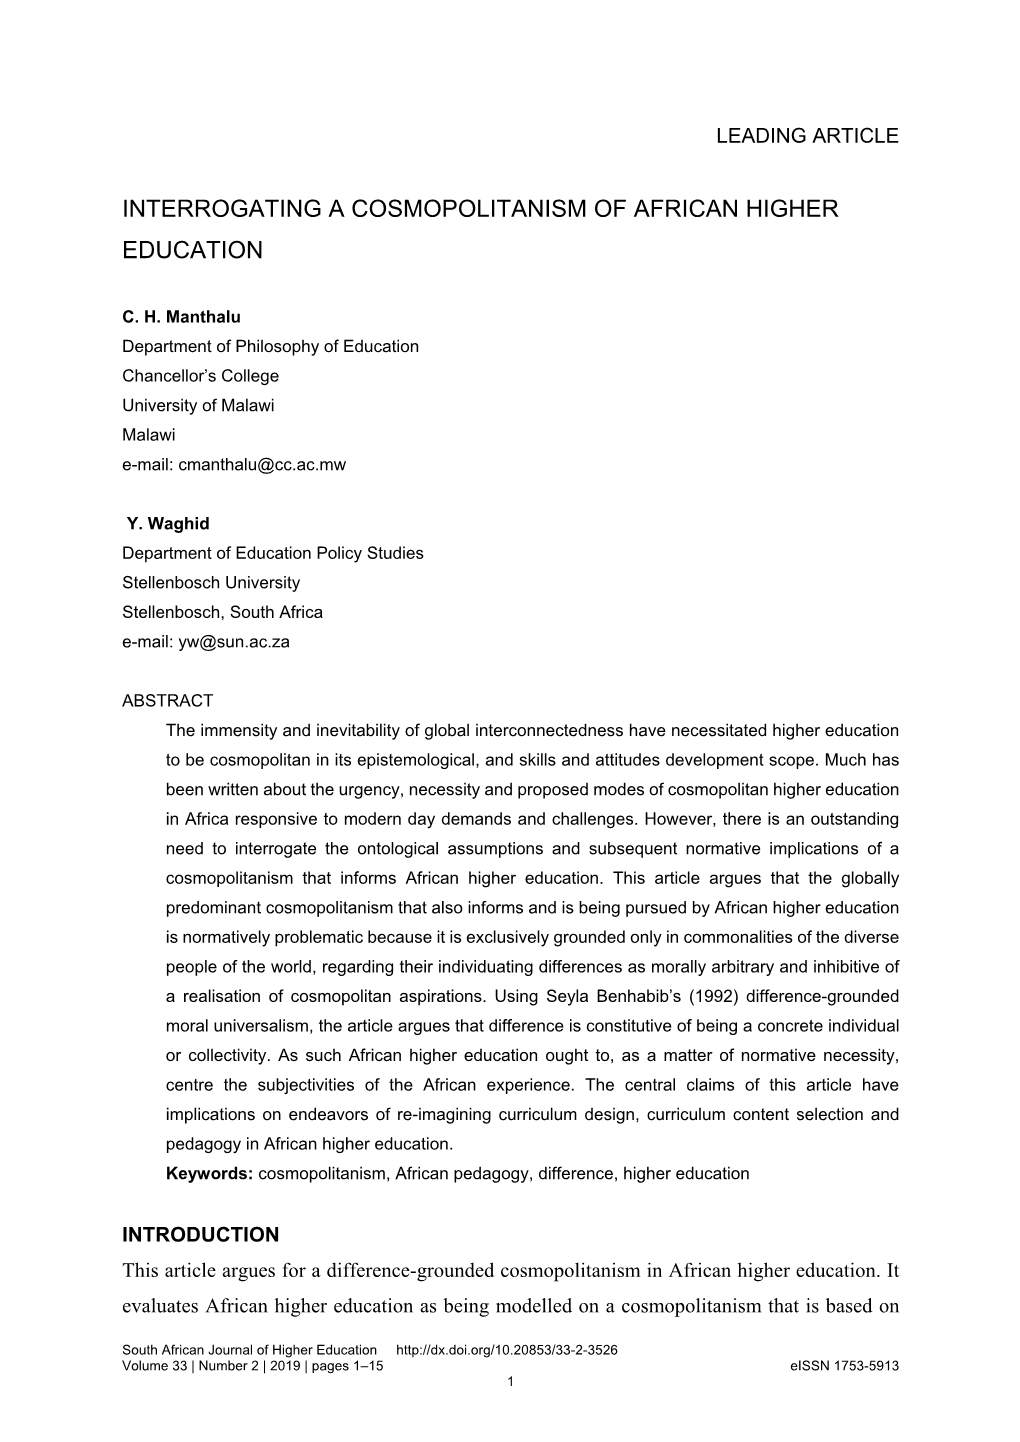 Interrogating a Cosmopolitanism of African Higher Education